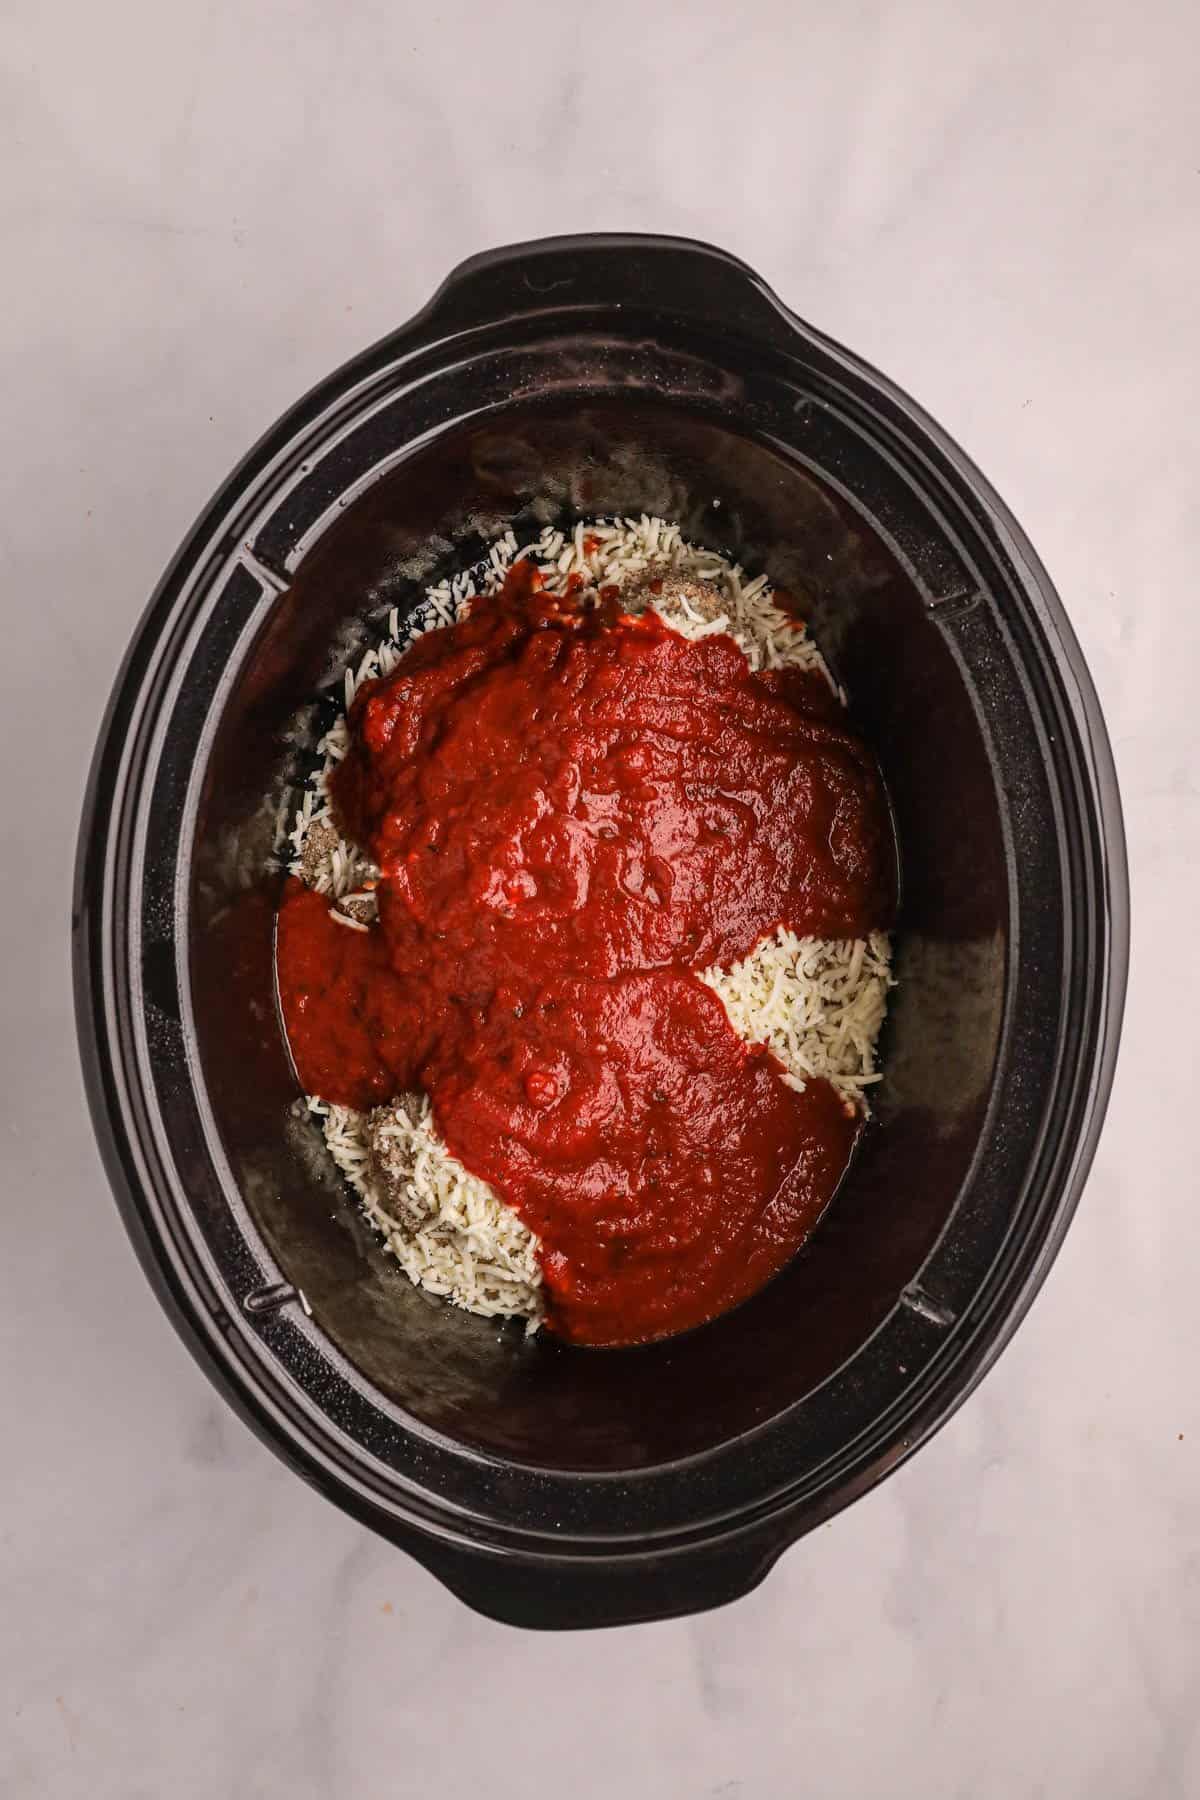 Adding marinara sauce on top of chicken and cheese in the slow cooker.